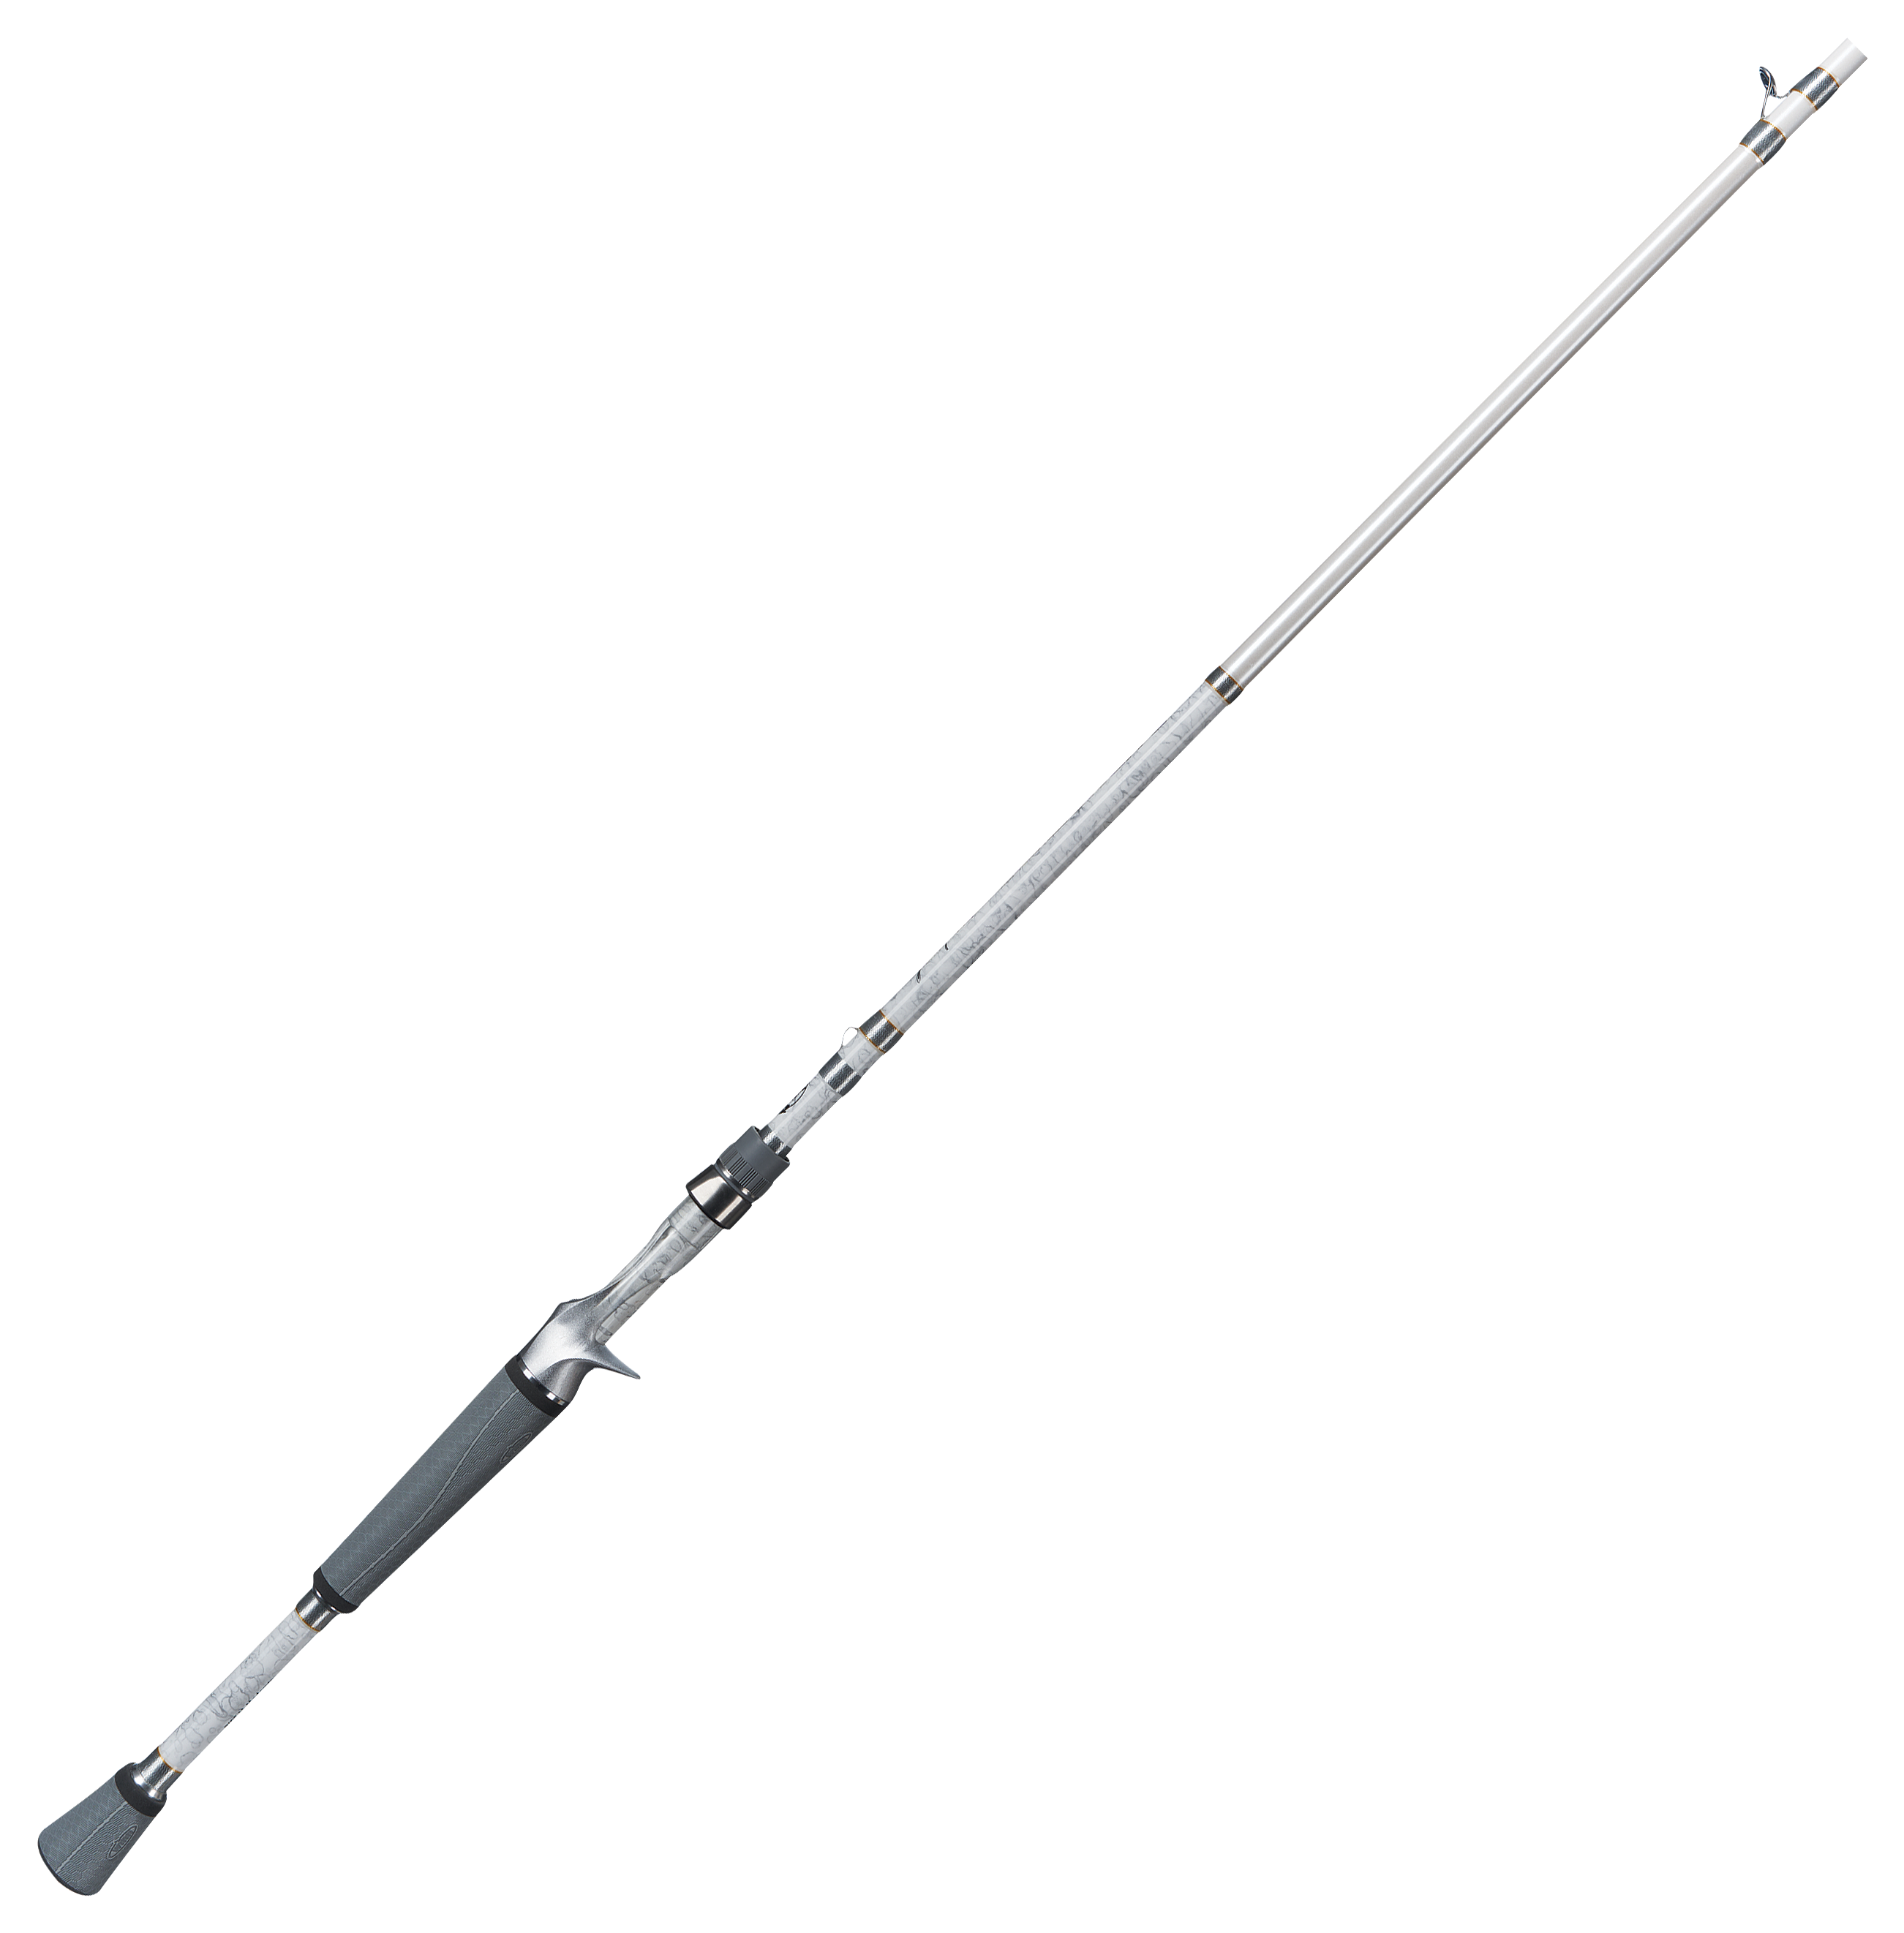 Located in Buena Park, Ca @187glyd is selling a Brand new PHENIX ELIXIR  ULTRA LIGHT TROUT ROD FX-S 761-1 SG 1 PIECE 7'6 2#-6# $175 pick